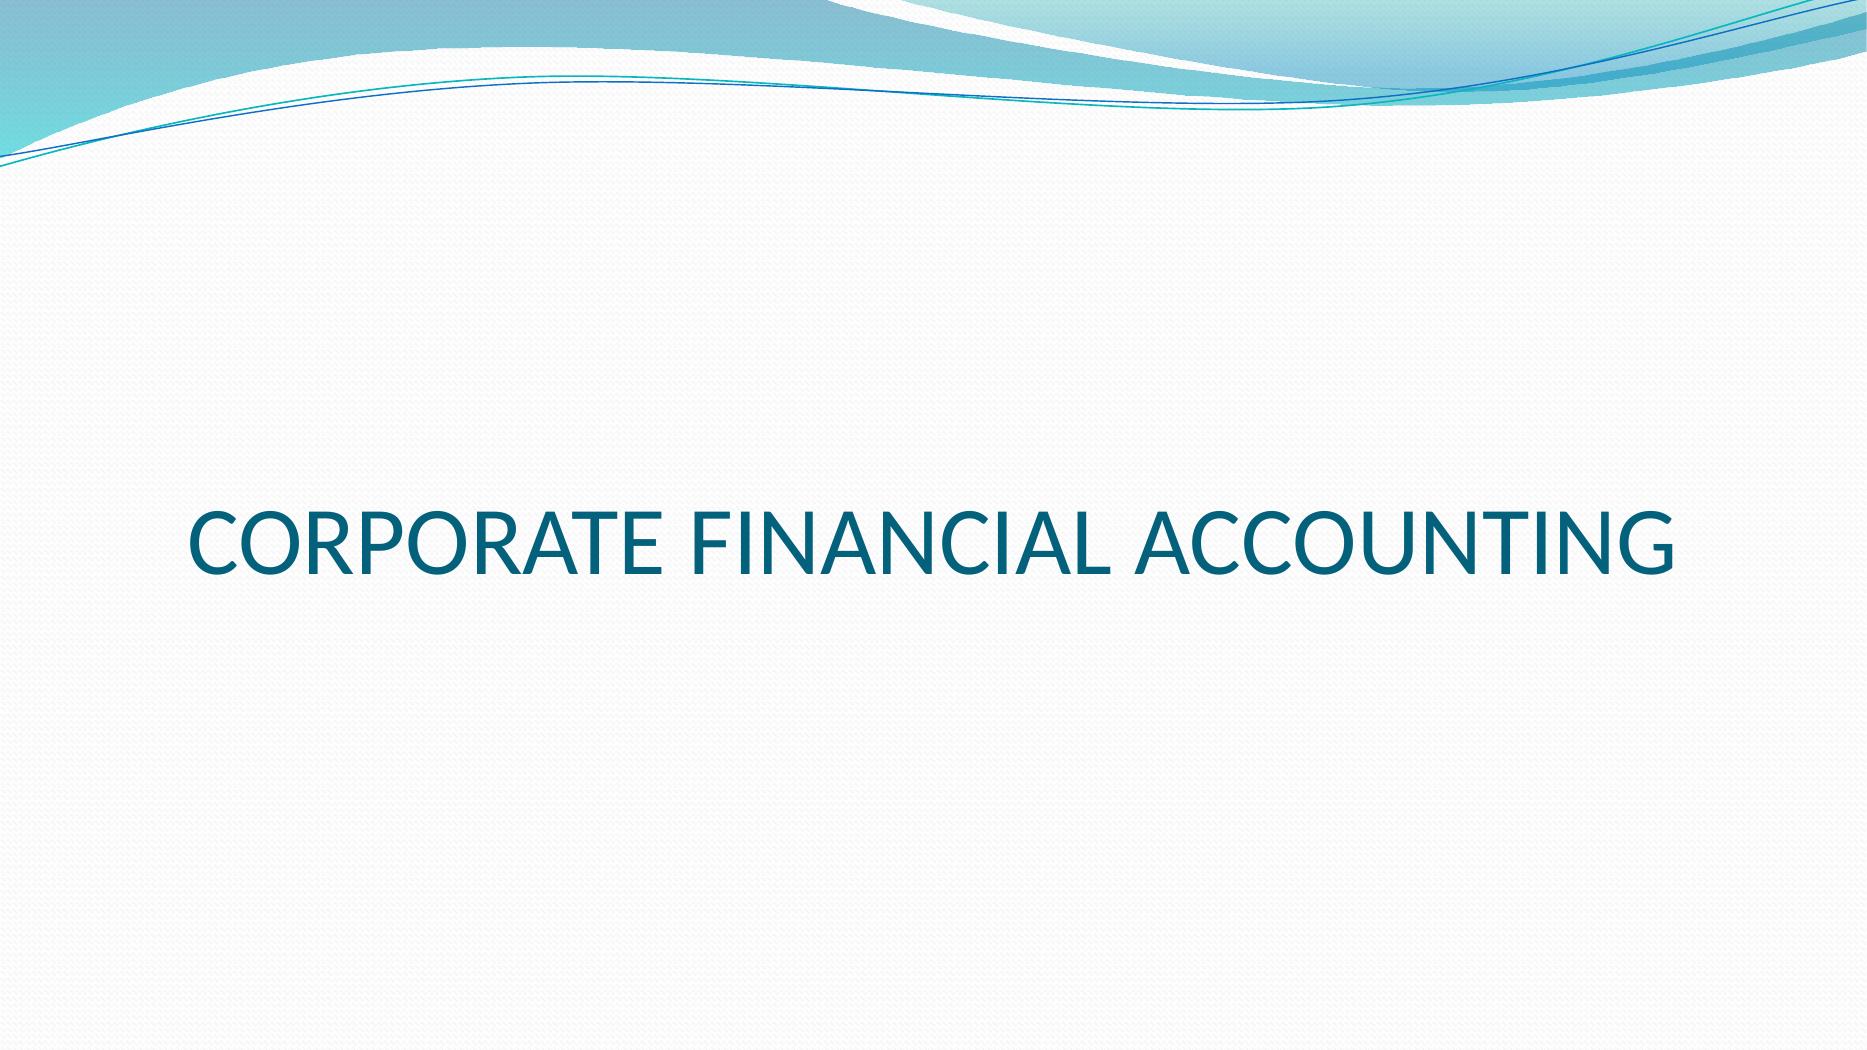 Corporate Financial Accounting_1